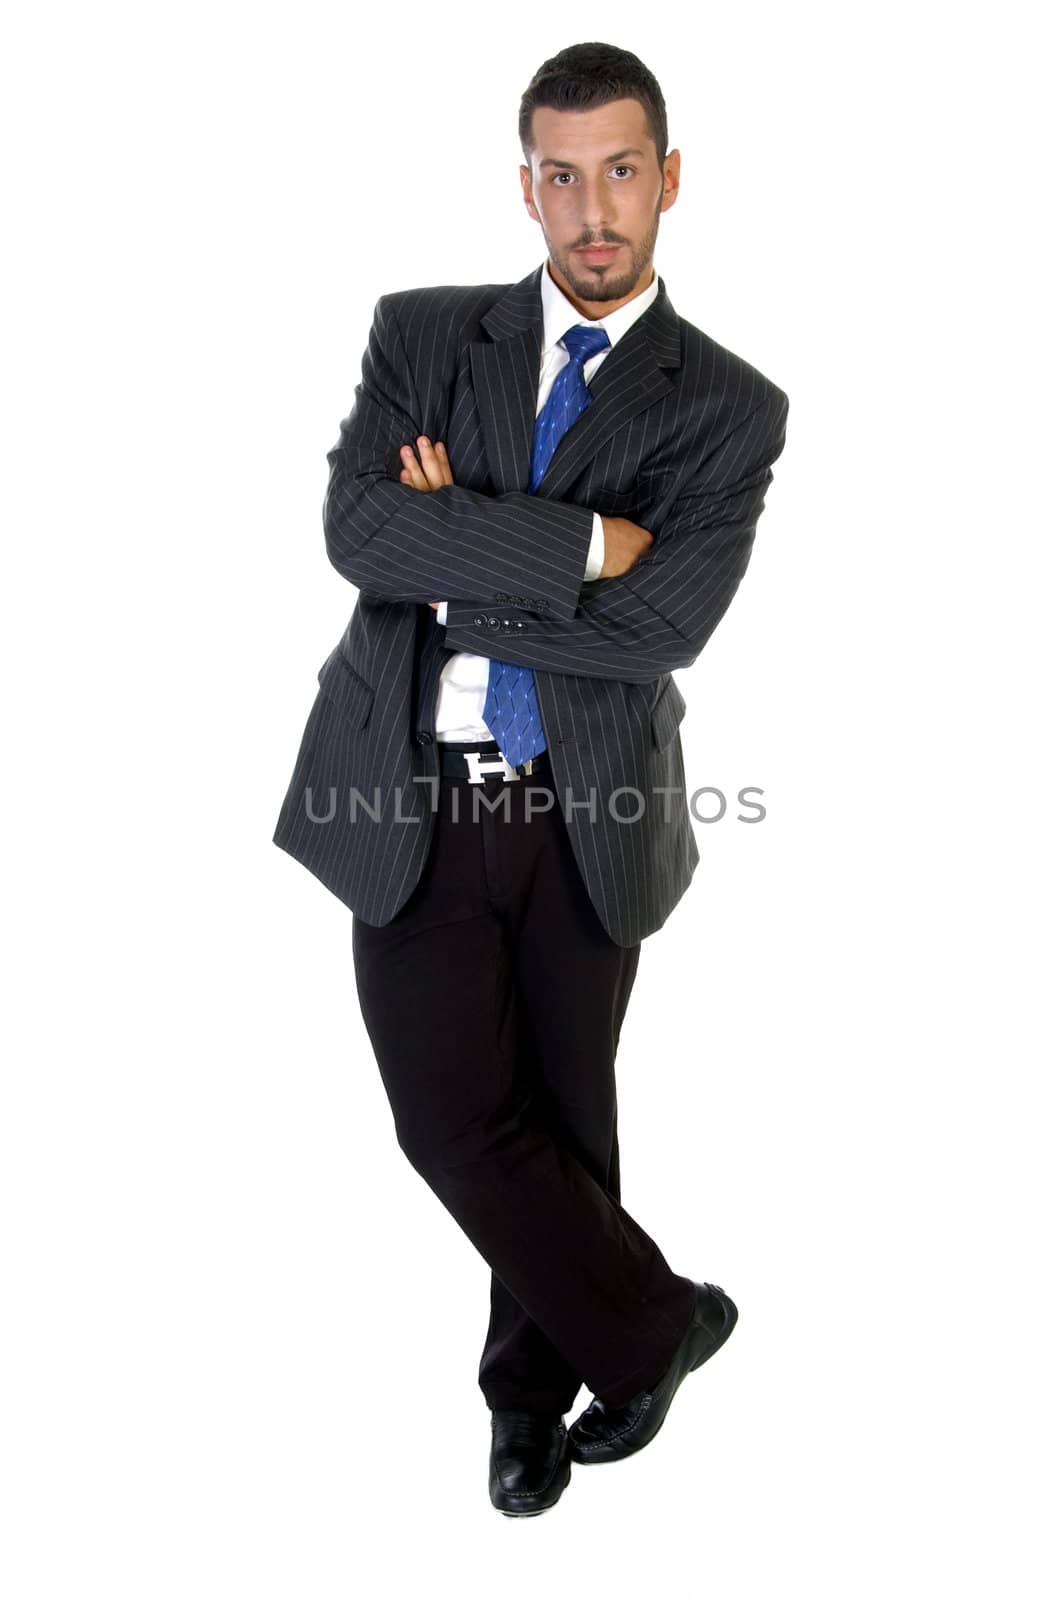 stylish pose of successful businessperson against white background